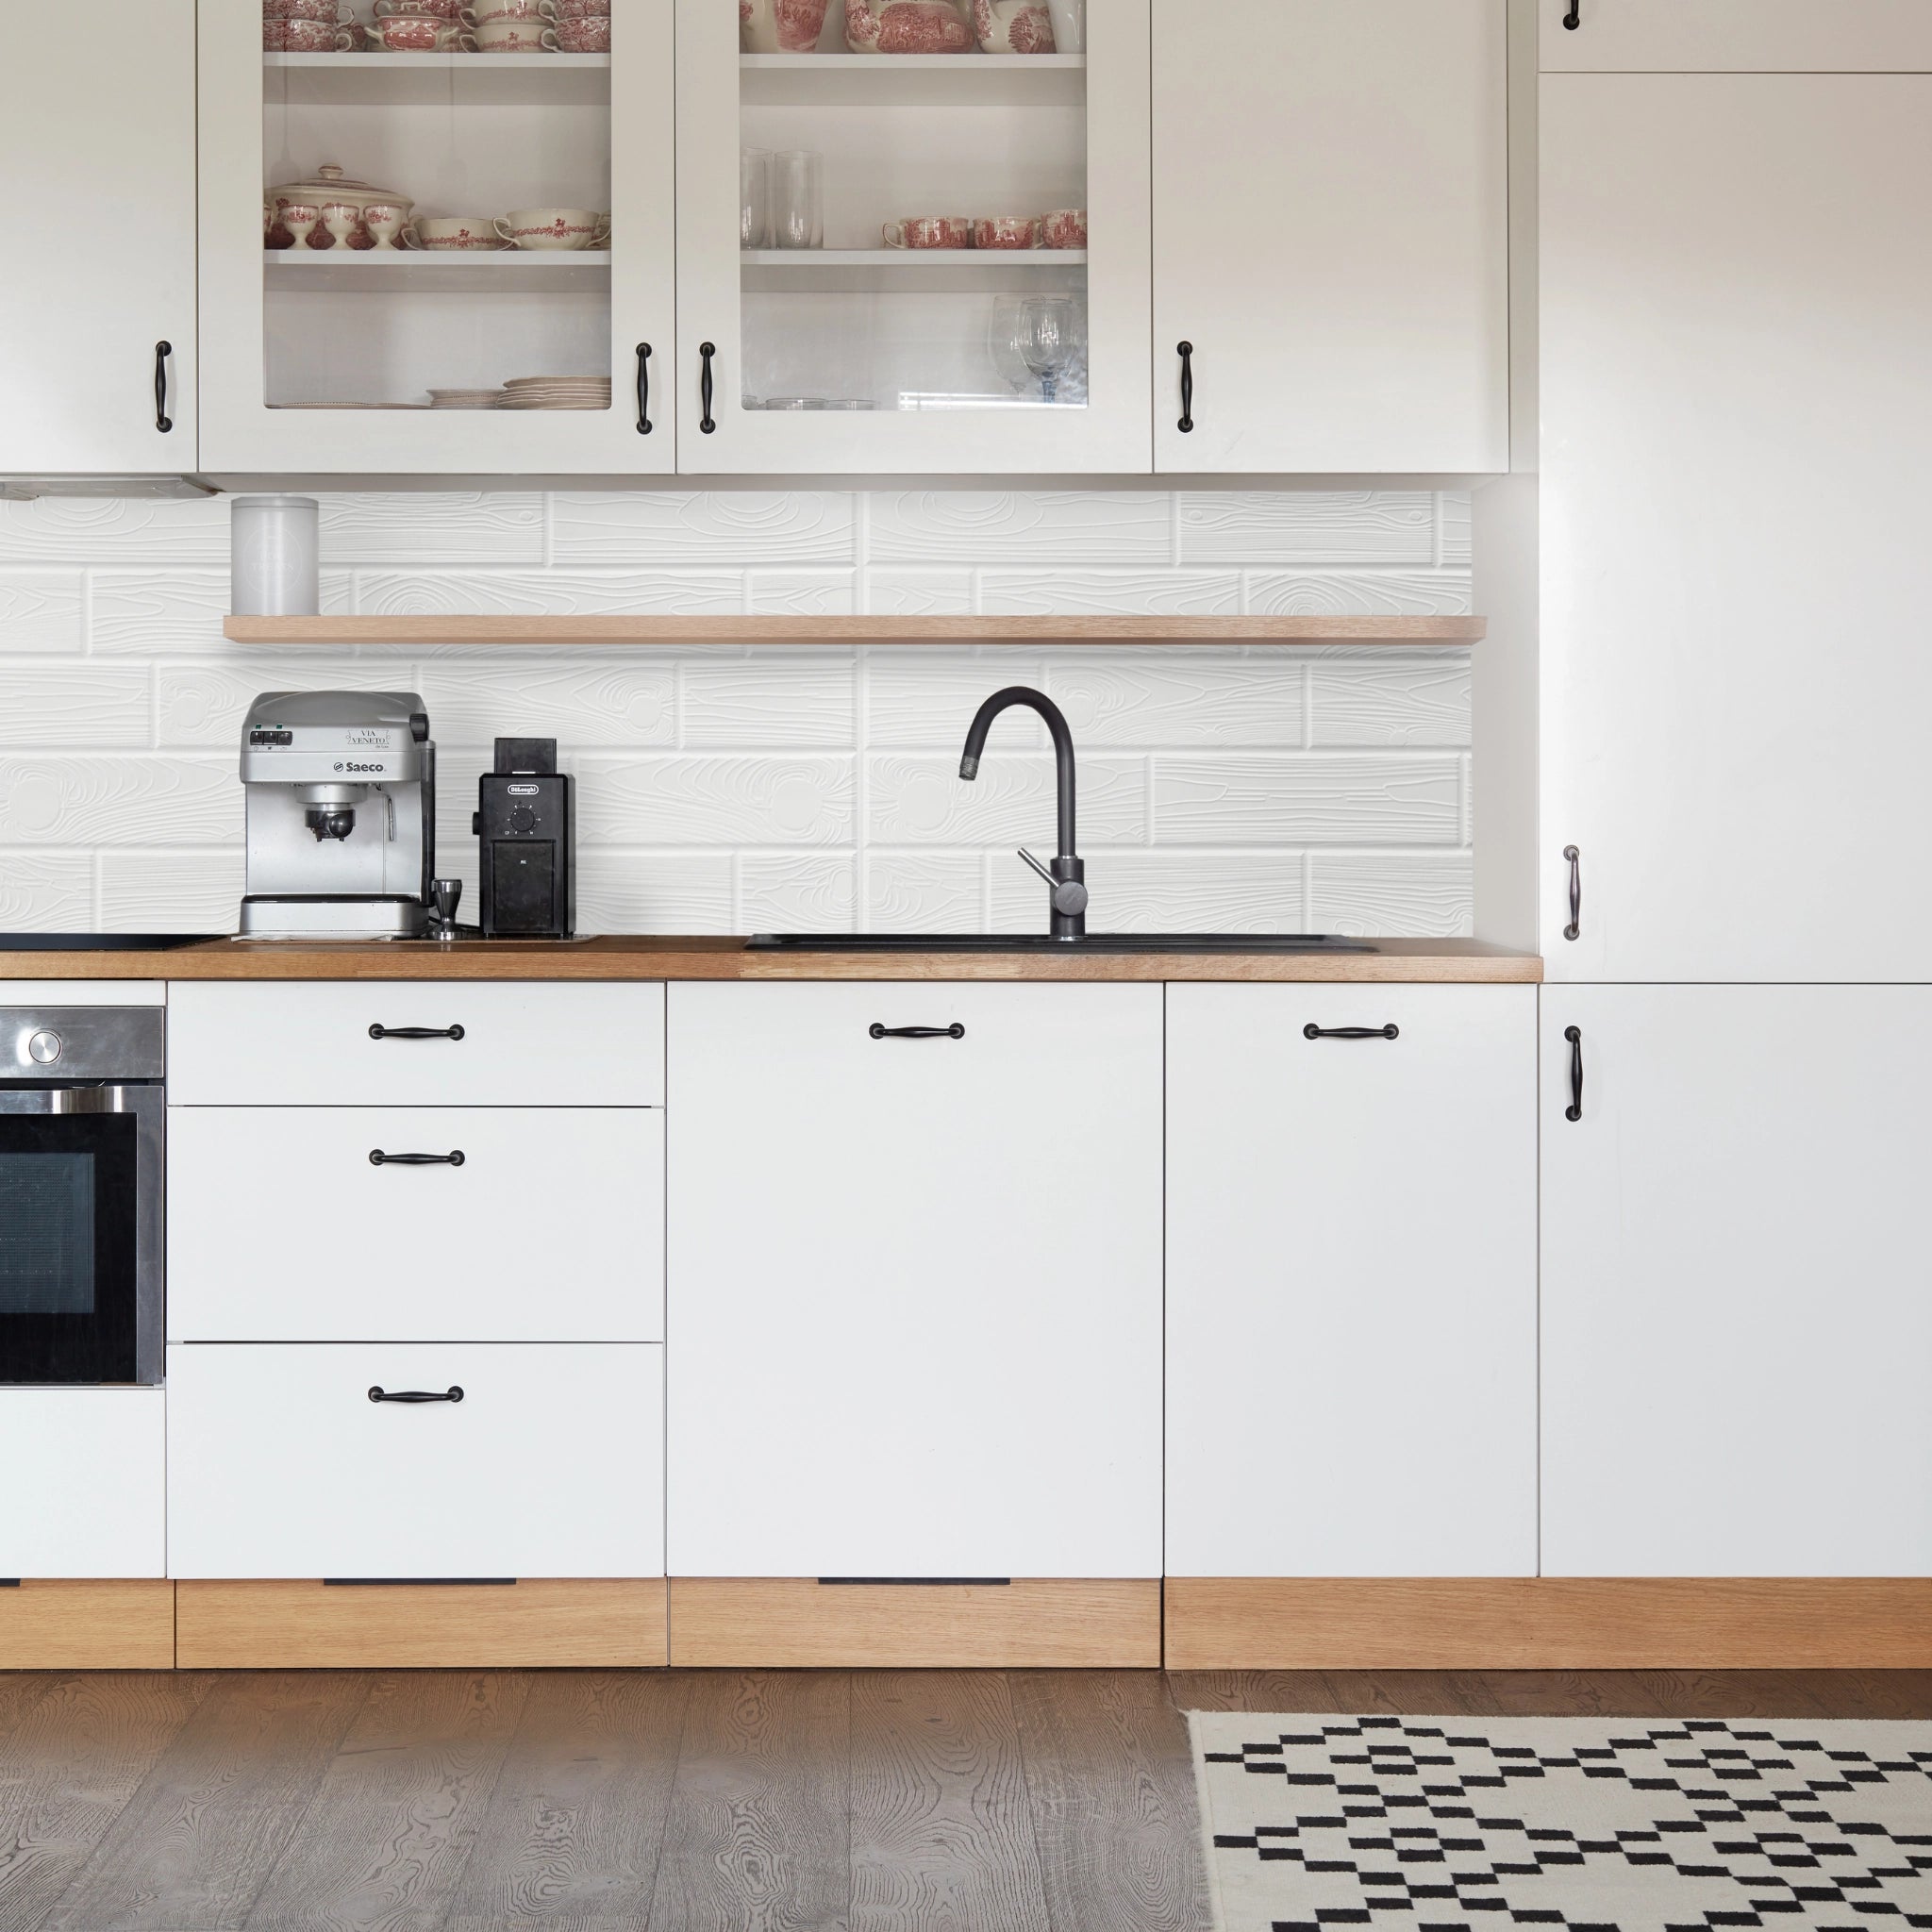 Kitchen with white geometric-patterned wall panels and modern decor